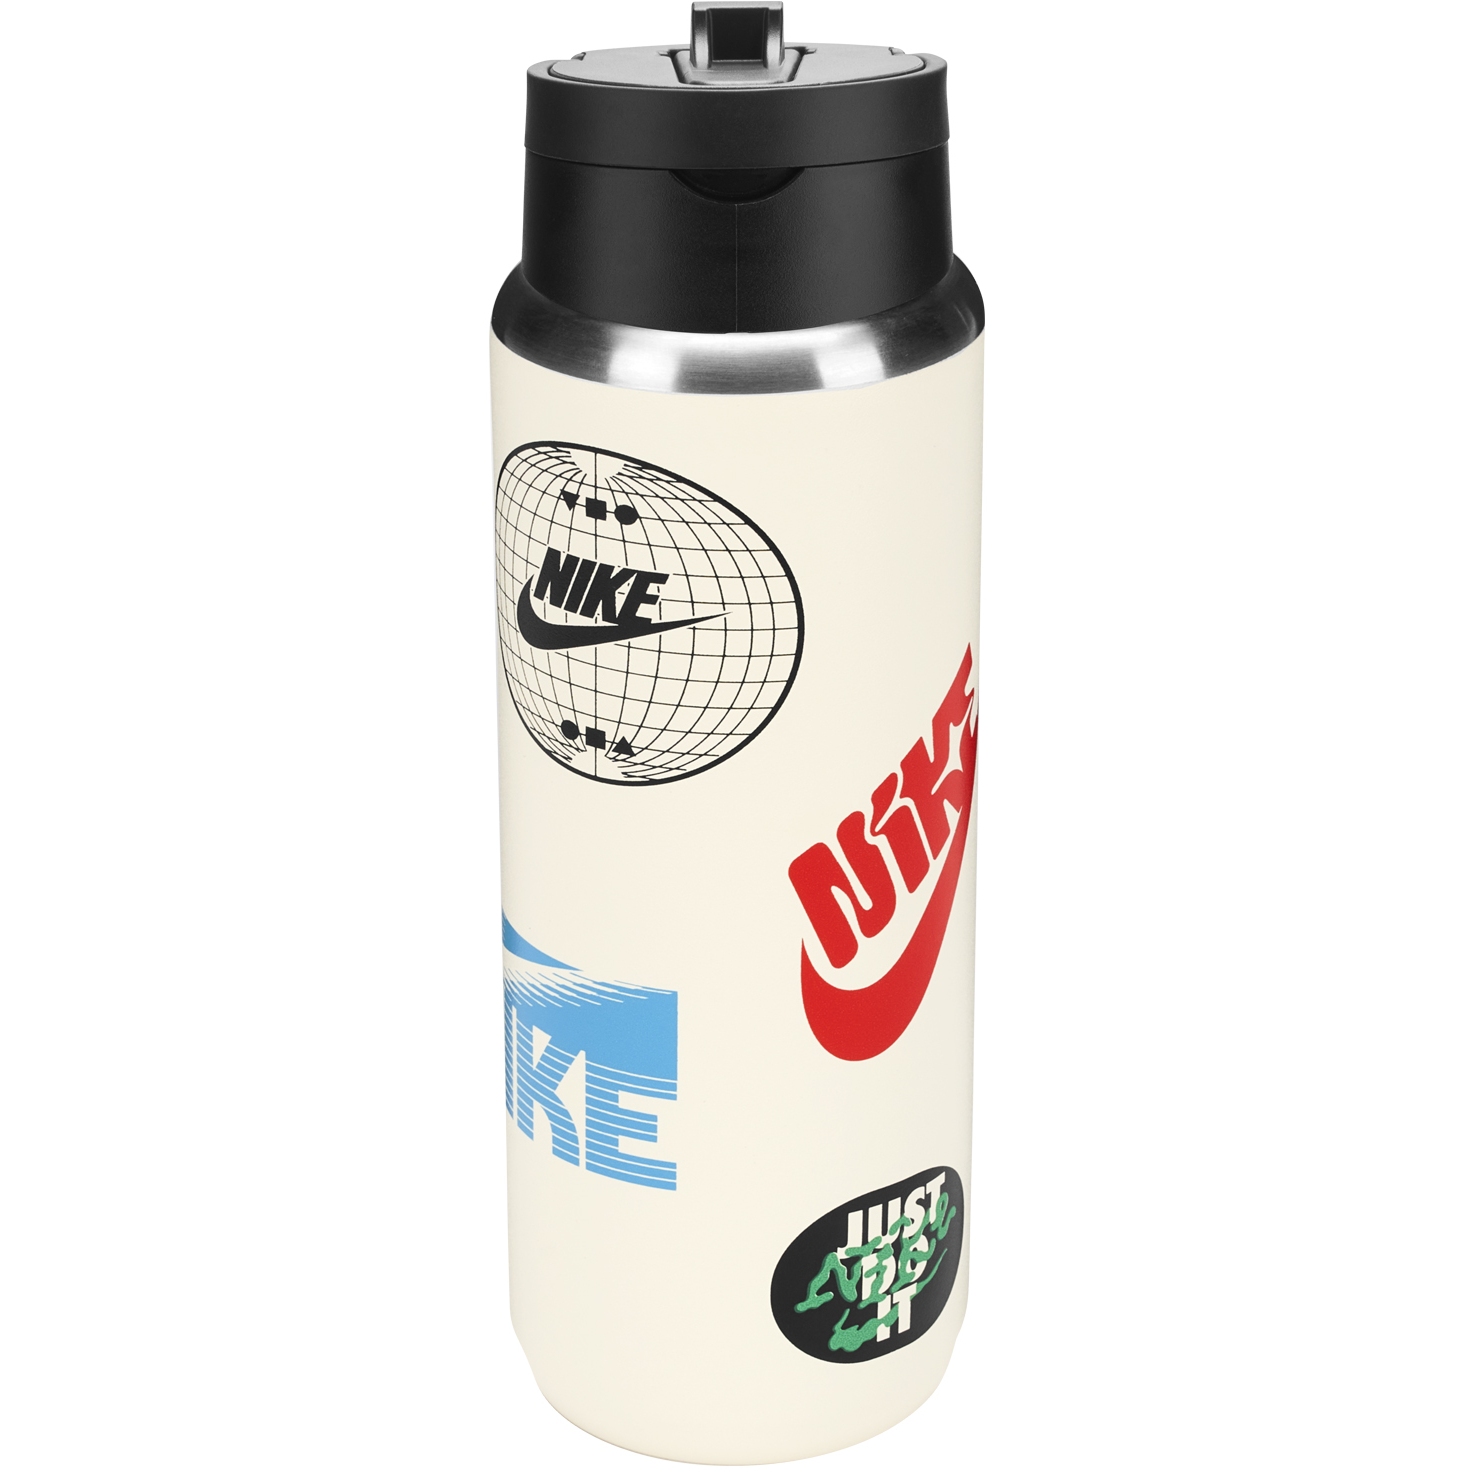 Productfoto van Nike Roestvrij Staal Recharge Straw Drinkfles 24 oz Graphic / 709ml - coconut milk/black/picante red 120